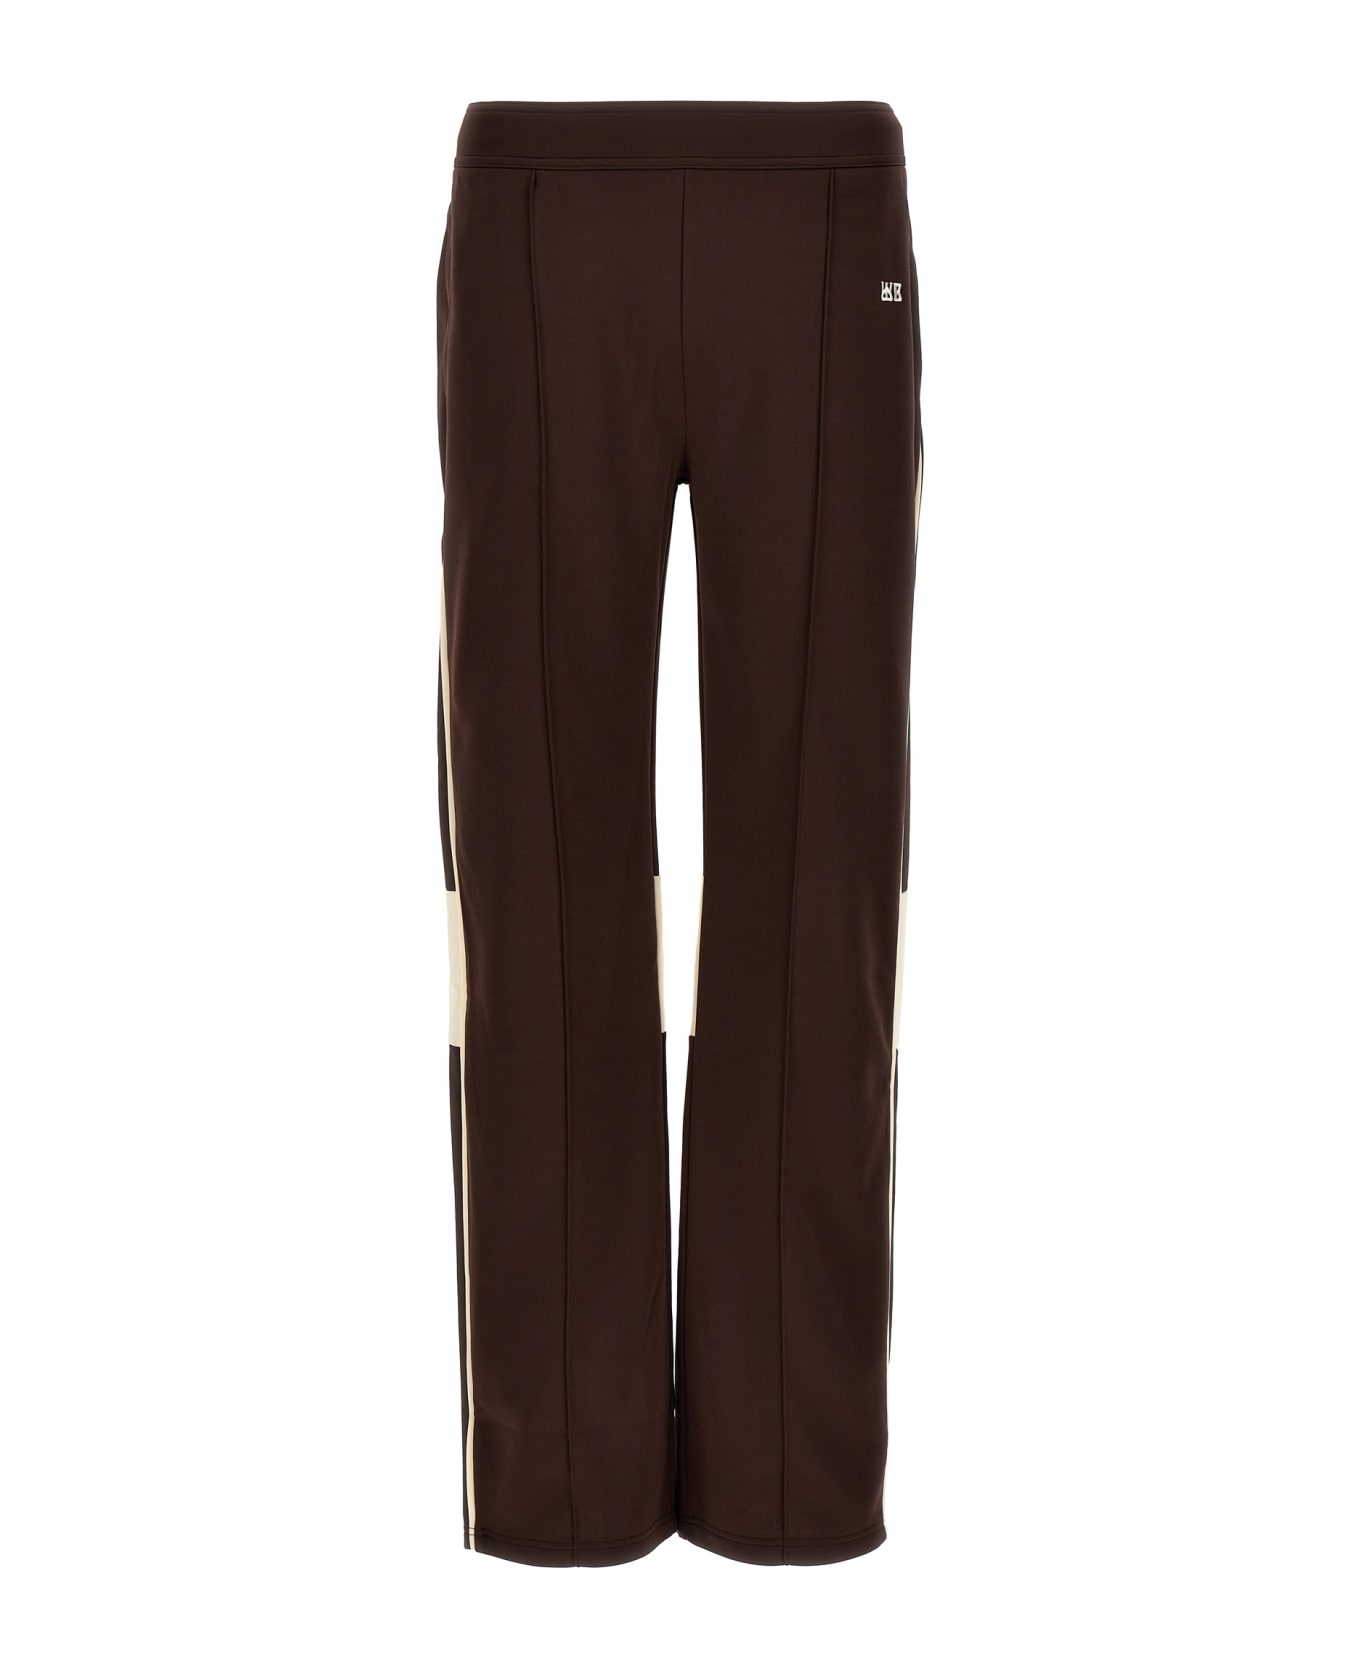 Wales Bonner 'track' Joggers - BROWN ボトムス